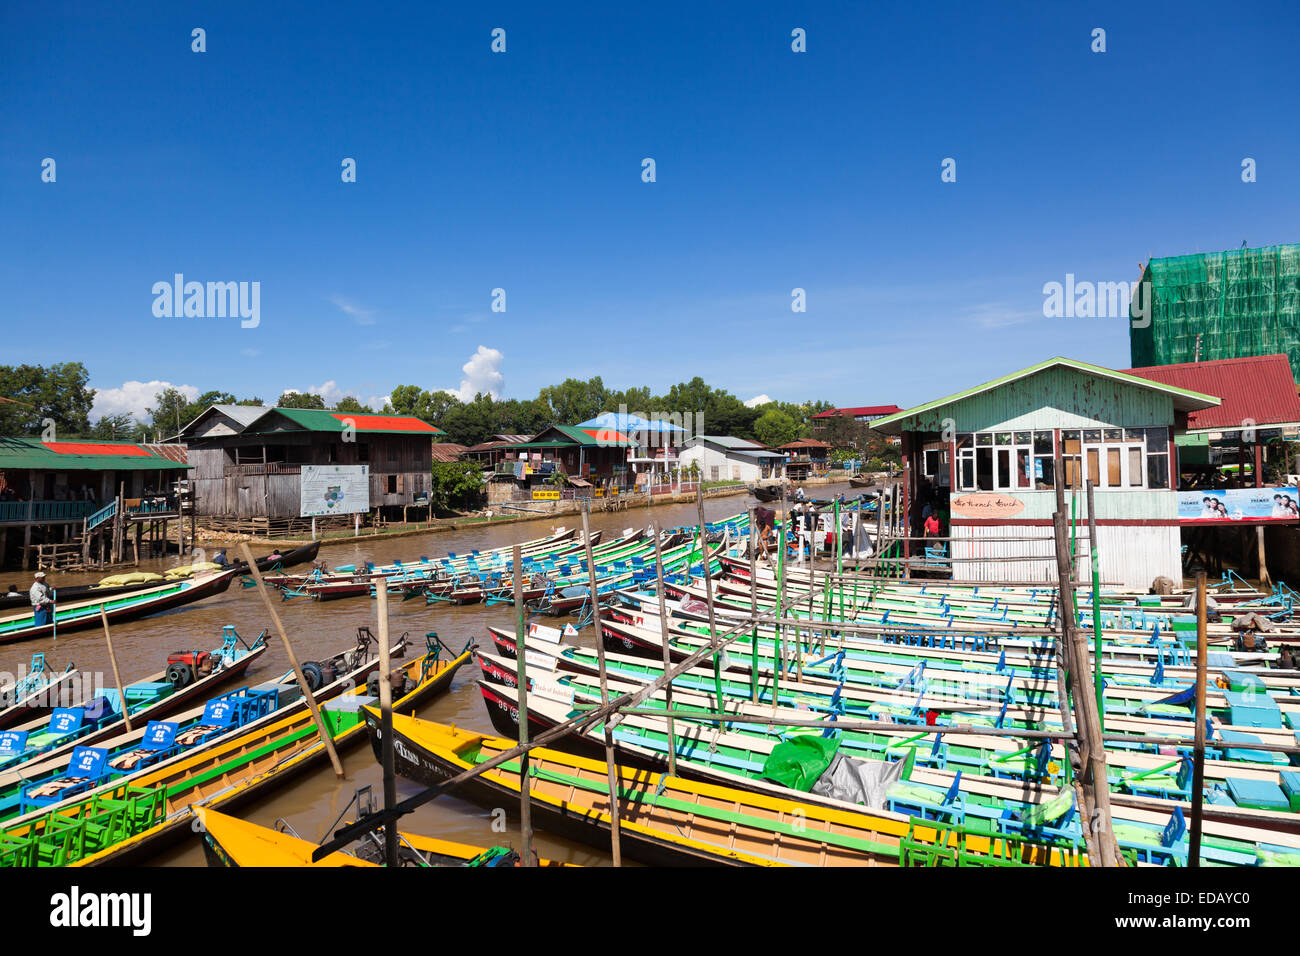 River and Lake boats waiting for passengers for Inle Lake, Nyaungshwe, Myanmar Stock Photo